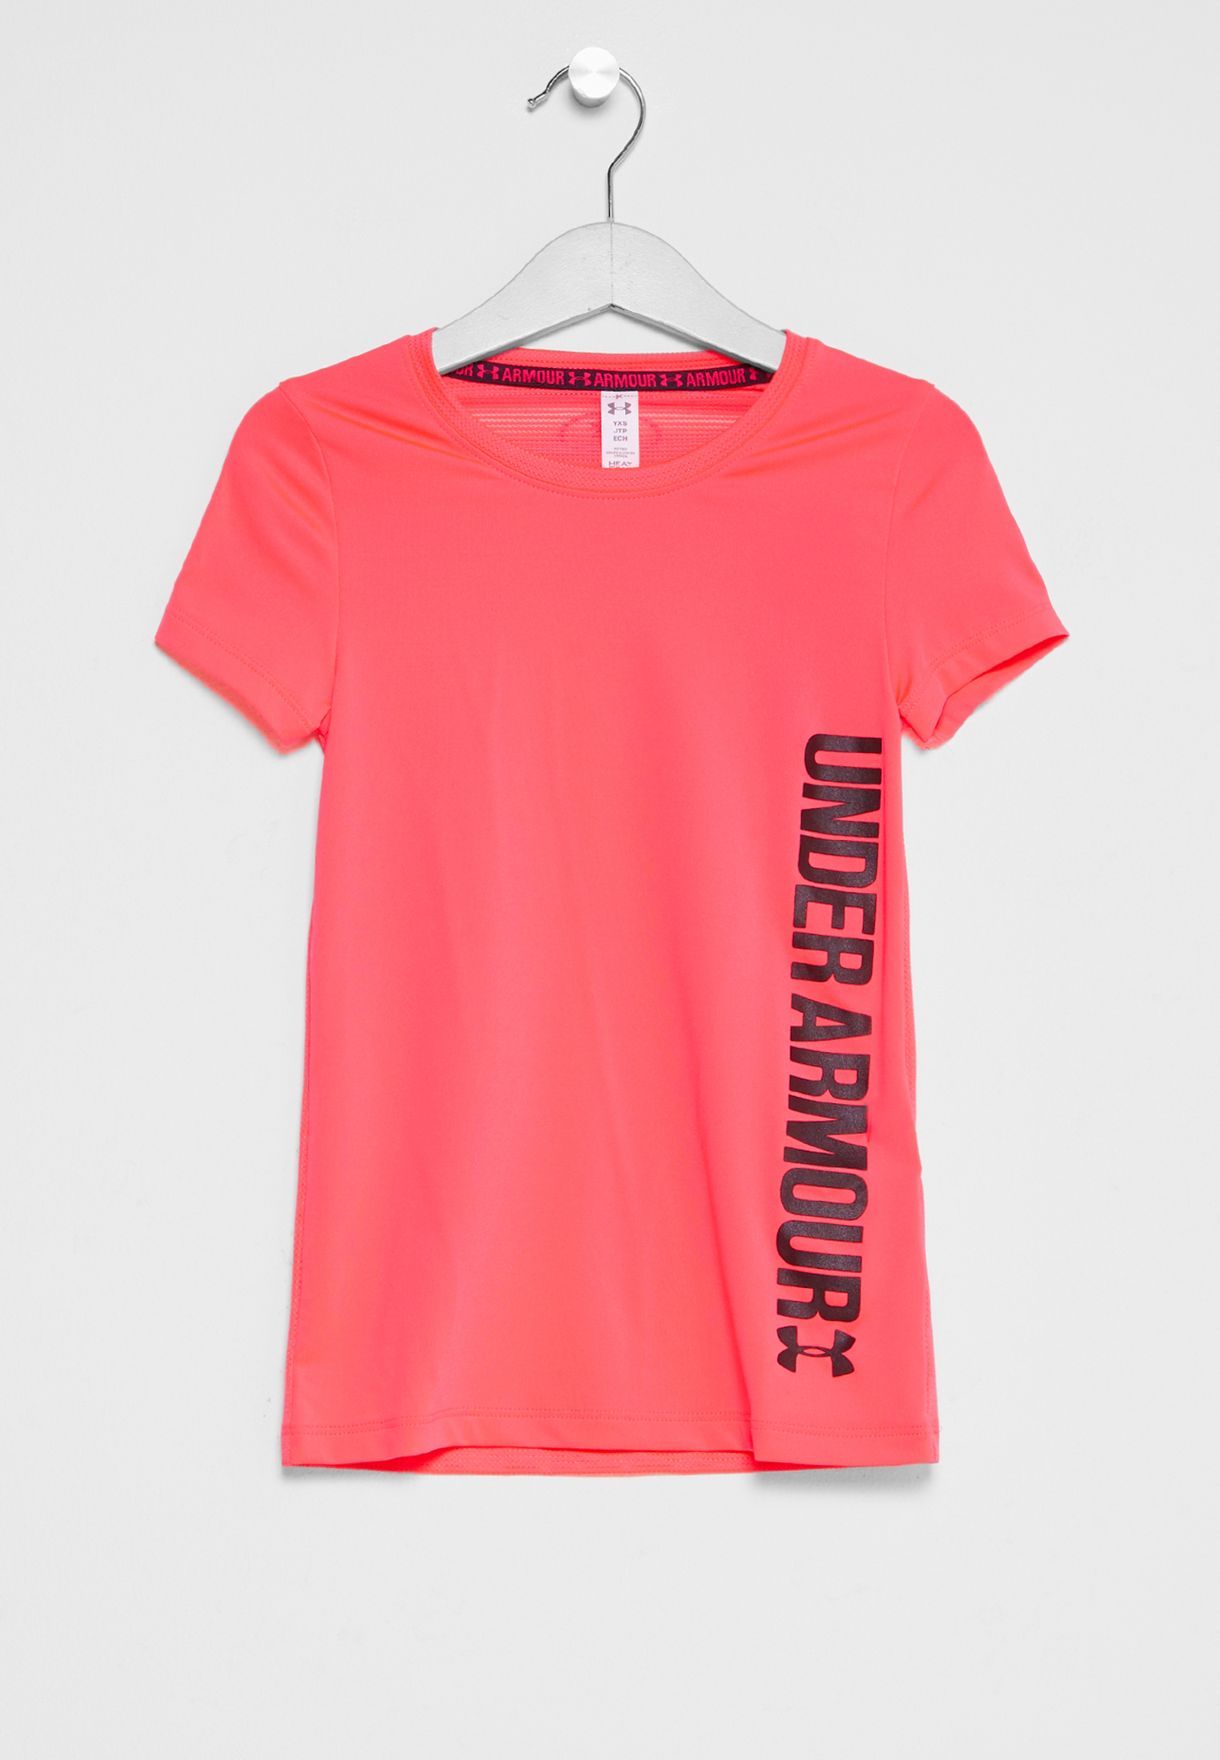 pink under armour shirt youth